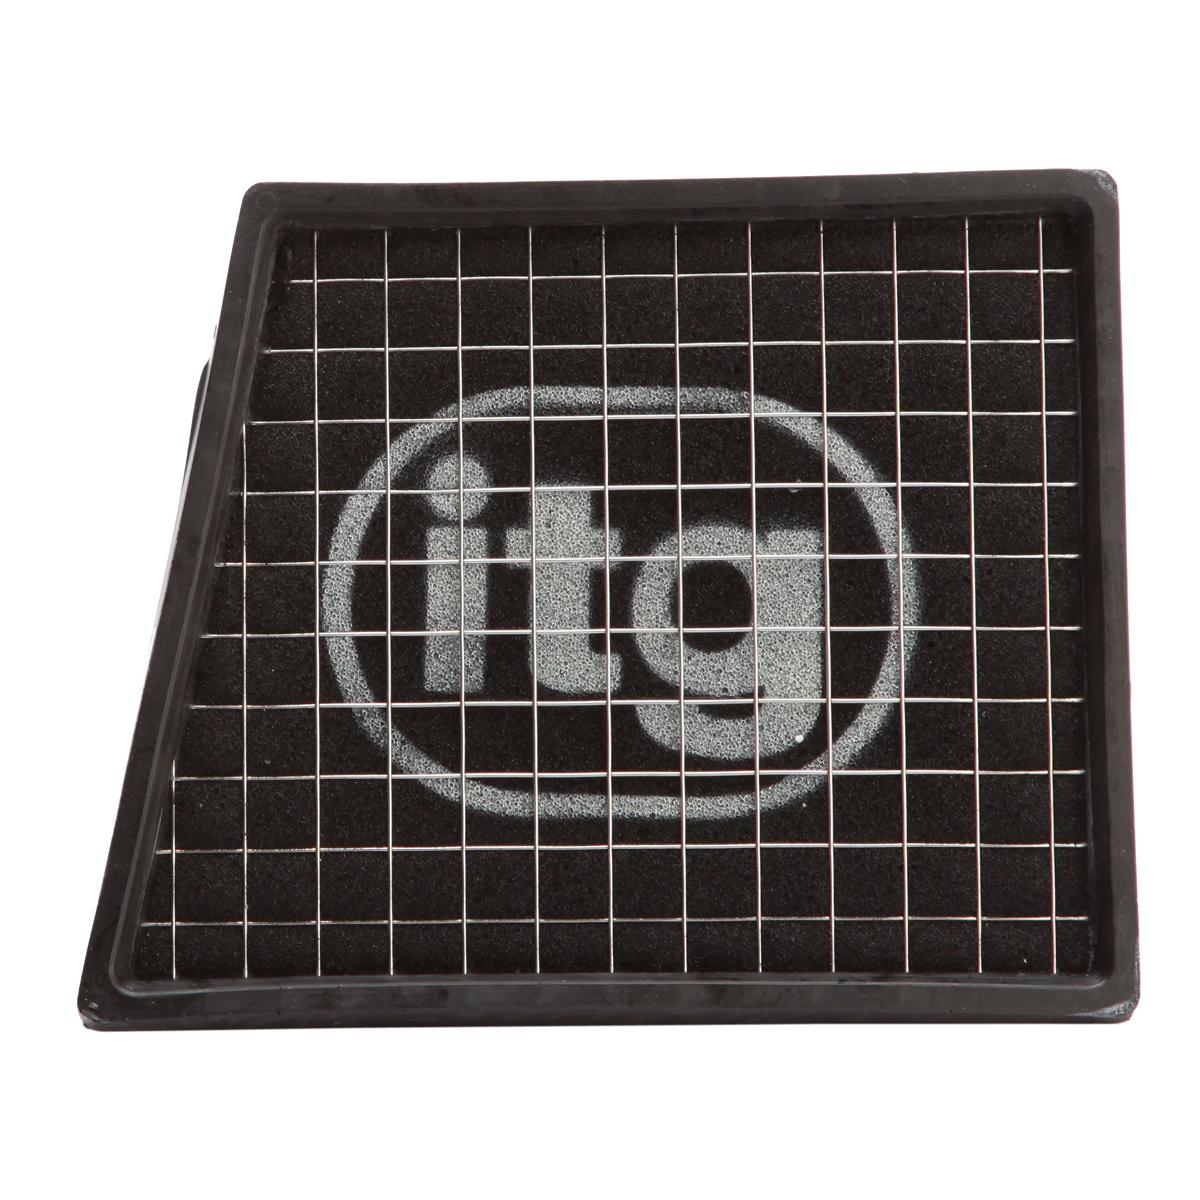 ITG Air Filter For Ford Fiesta VI 1.25, 1.4, 1.6, 1.6D (08>)